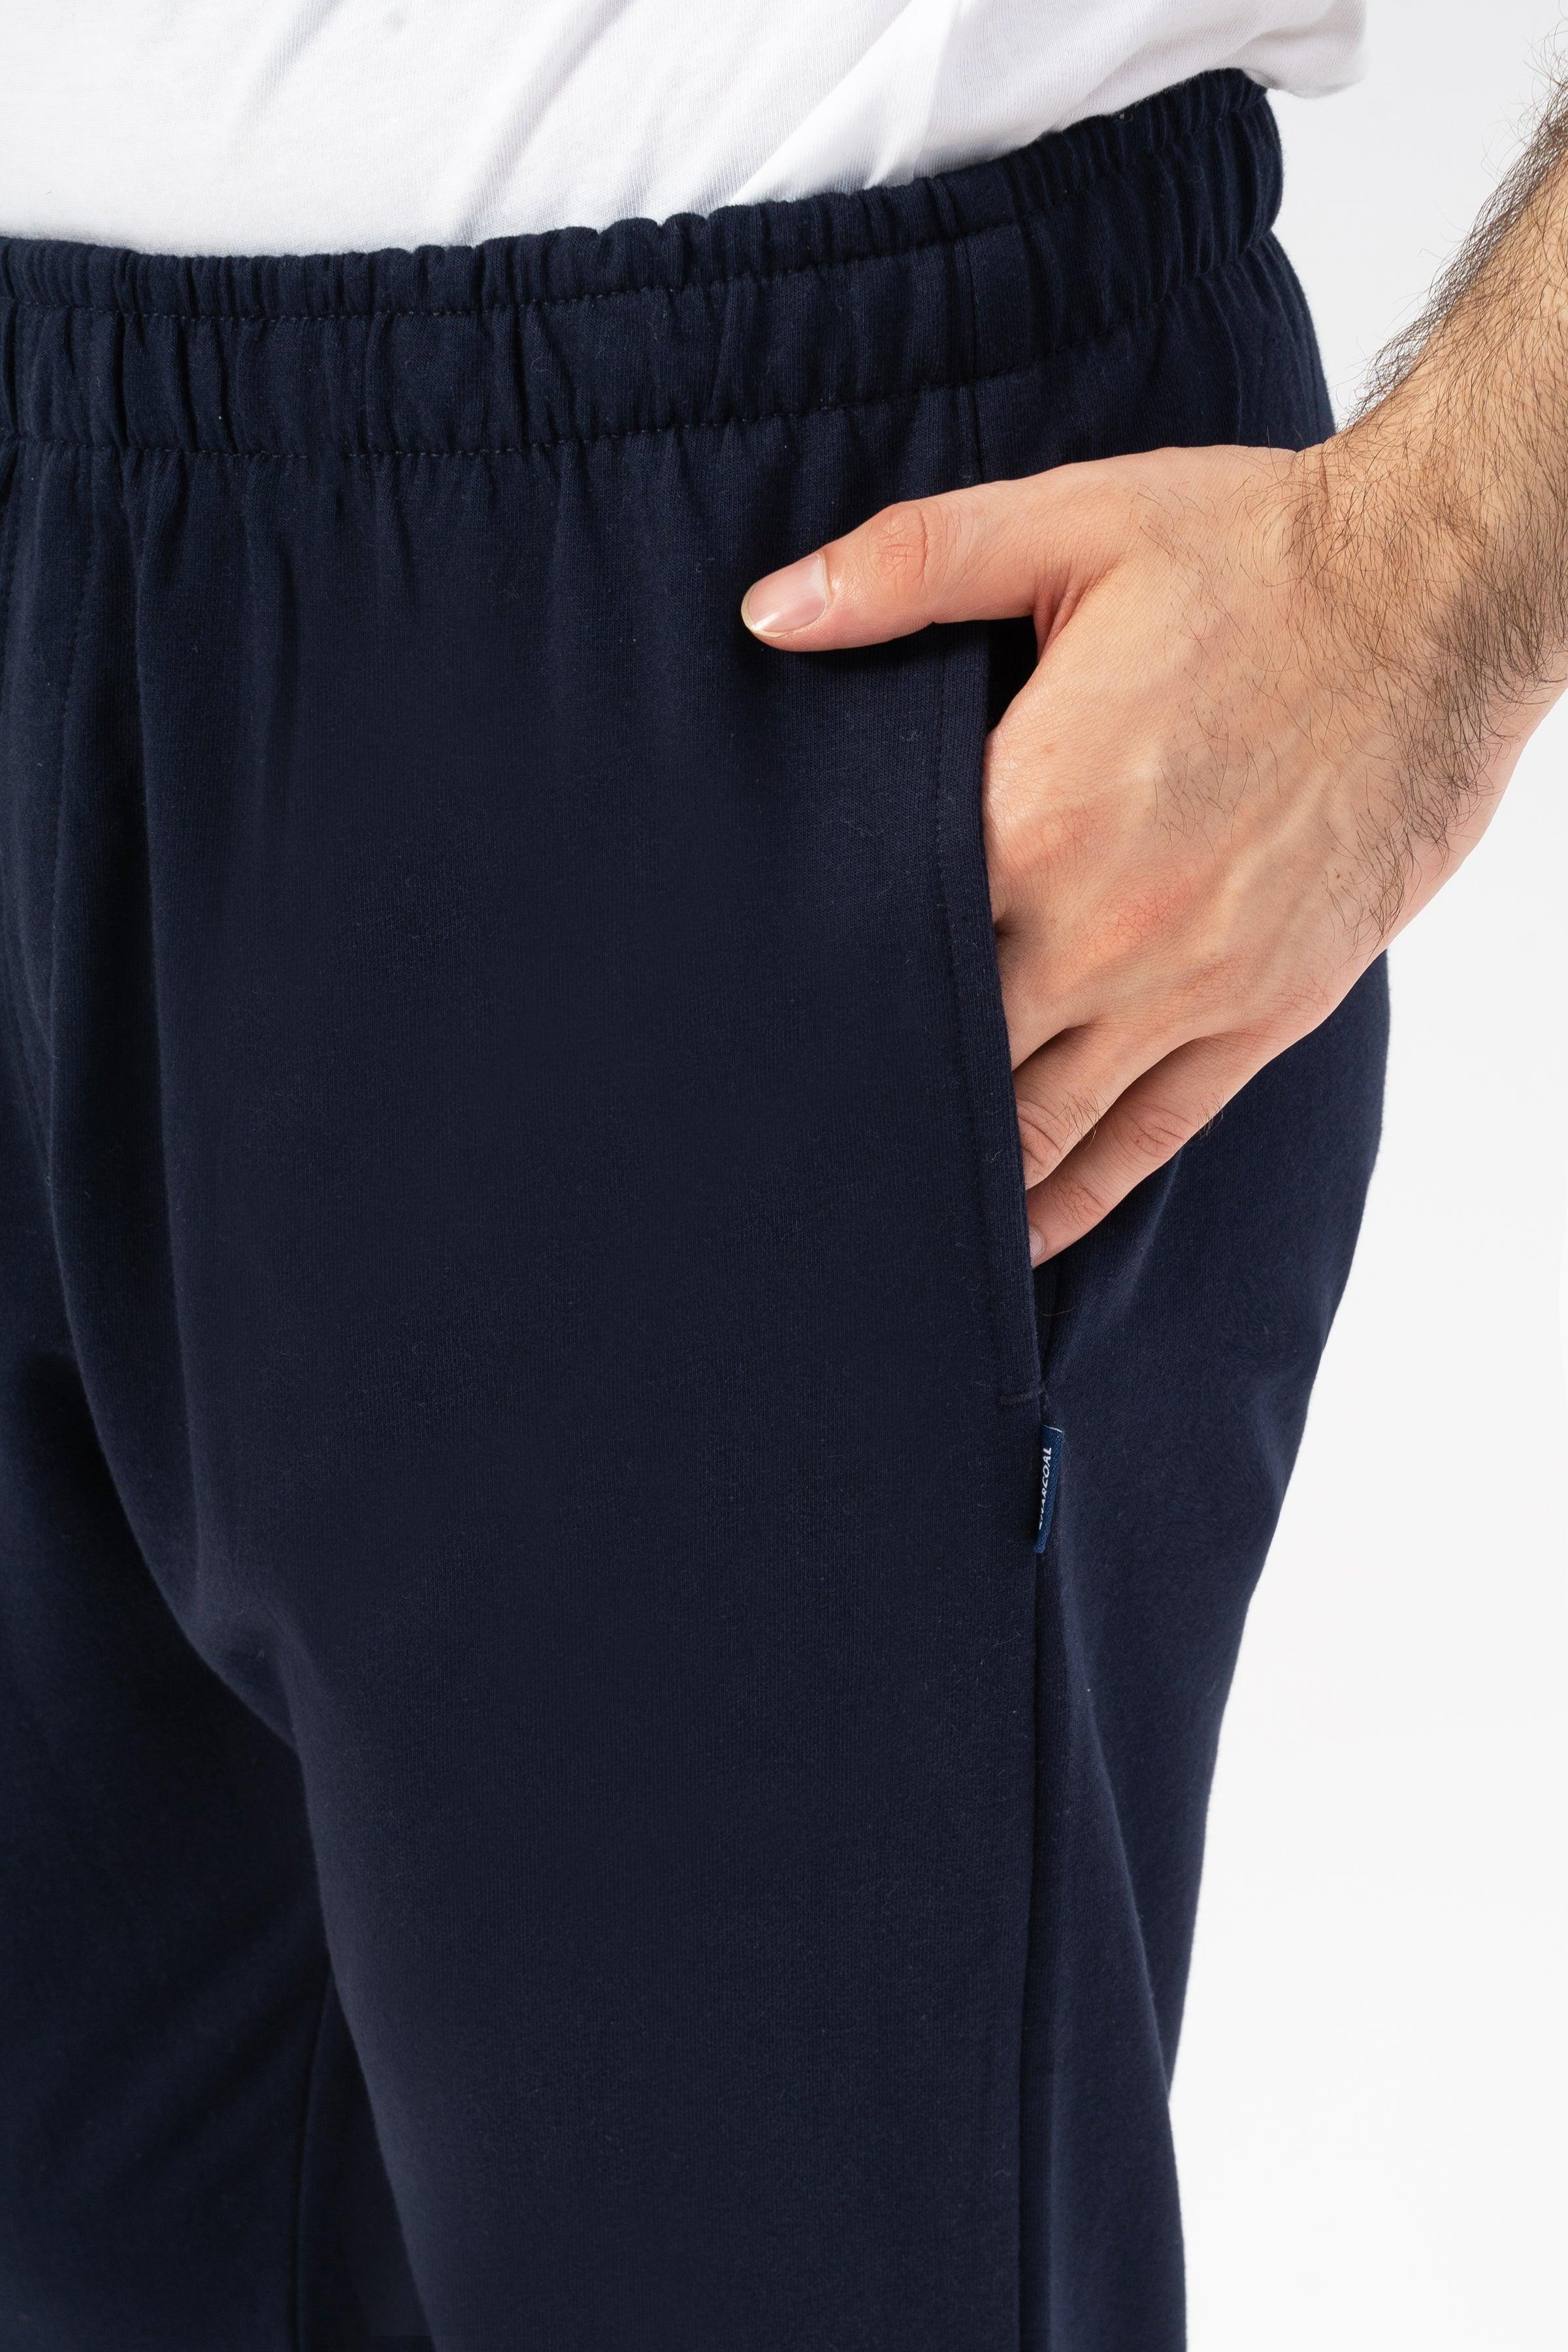 ULTIMATE COMFORT SLEEPWEAR PANT NAVY at Charcoal Clothing